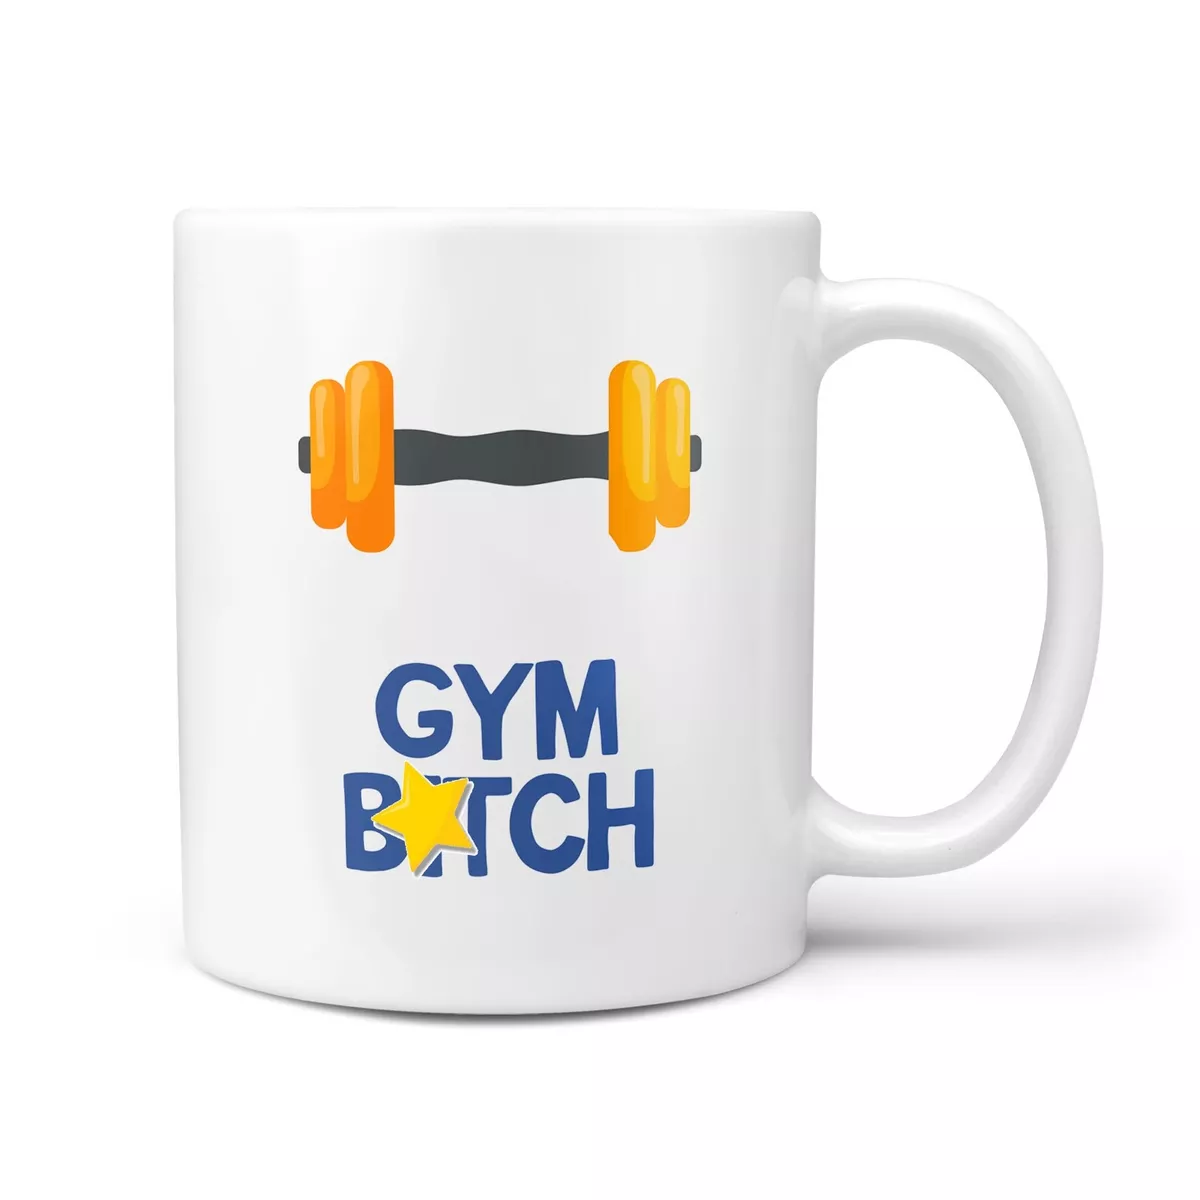 Ceramic Mug Gifts for gym lovers Gifts for gym freaks Gym rat gifts Gift gym  rat | eBay